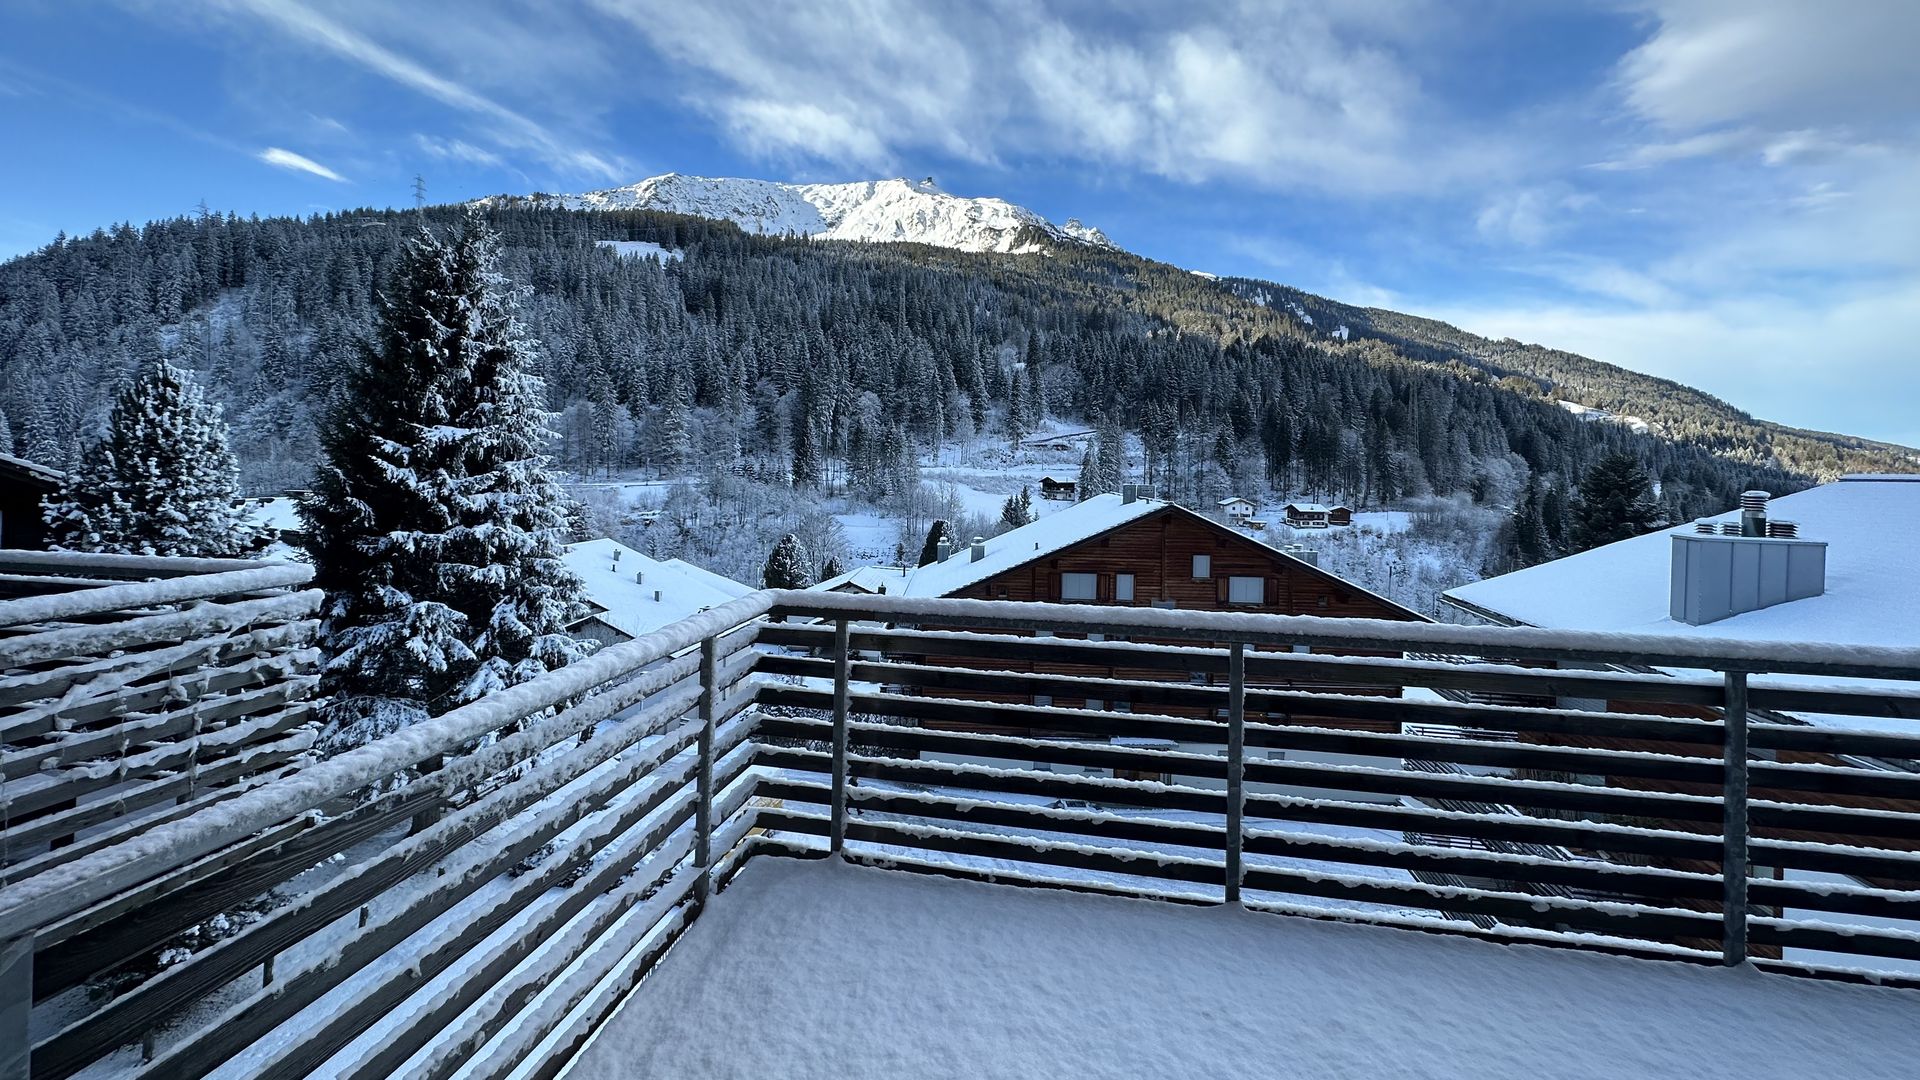 A stunning, snowy view of the Swiss Alps from an apartment in Klosters, Switzerland